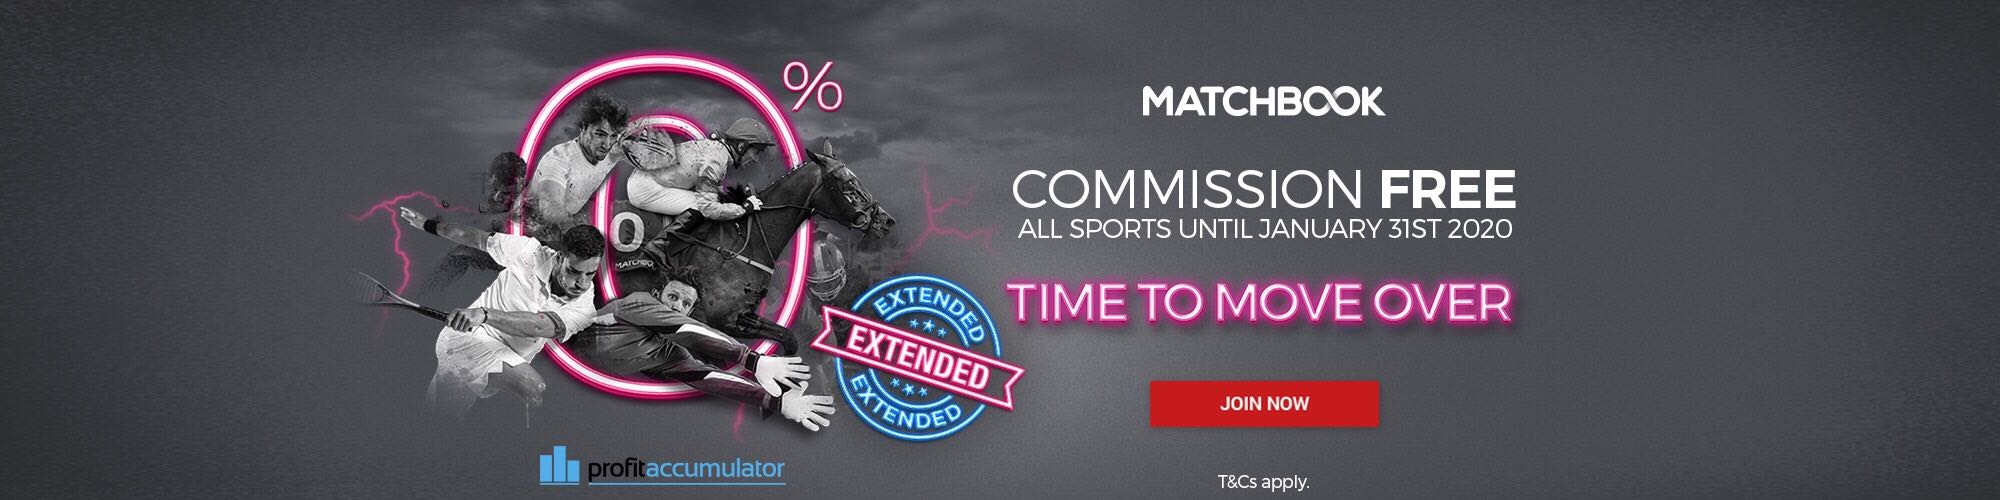 0% on Matchbook until January 31st 2020 with Profit Accumulator